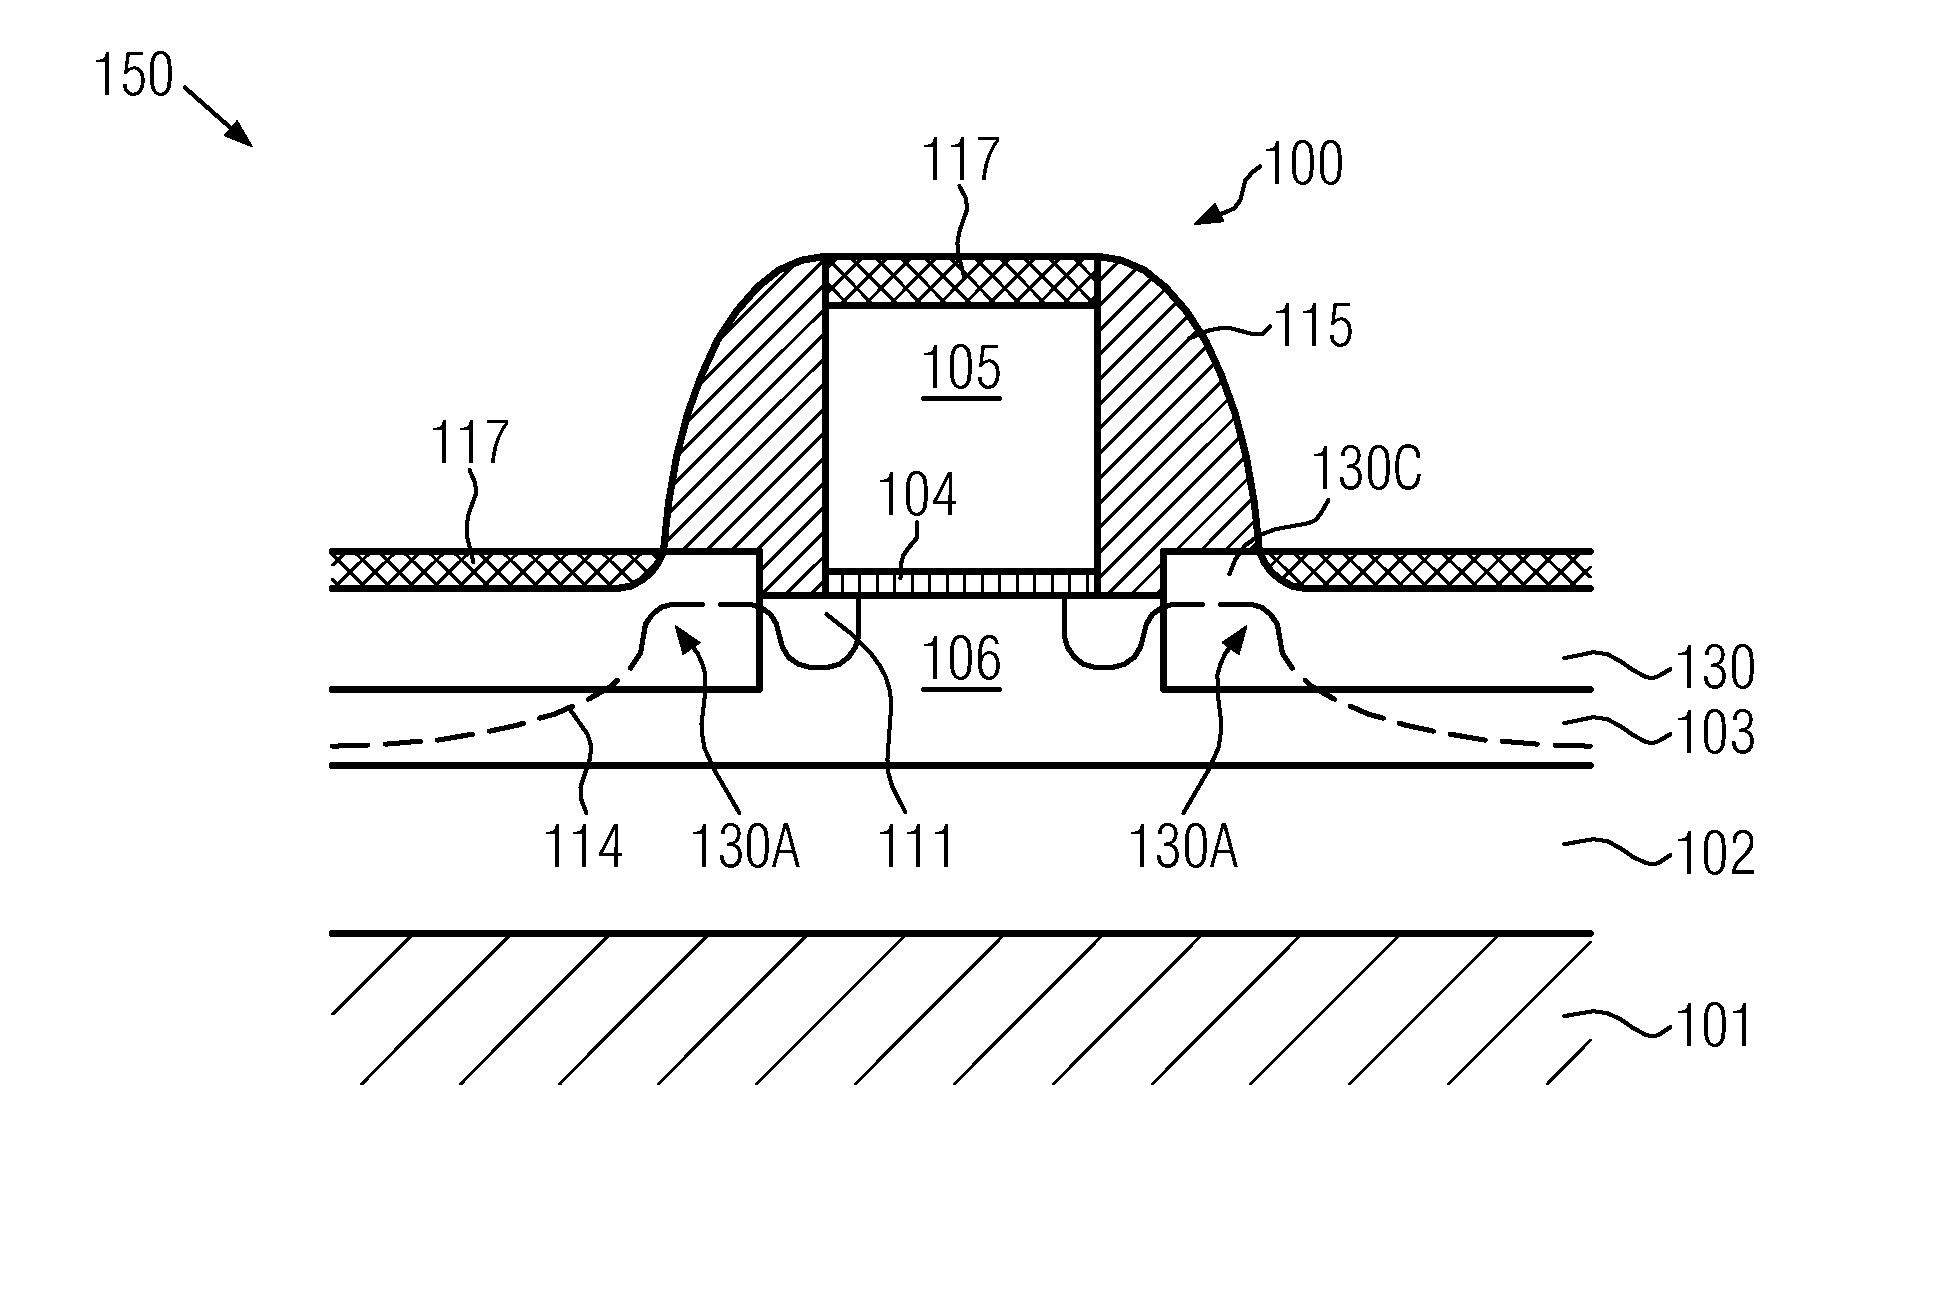 Technique for providing stress sources in MOS transistors in close proximity to a channel region